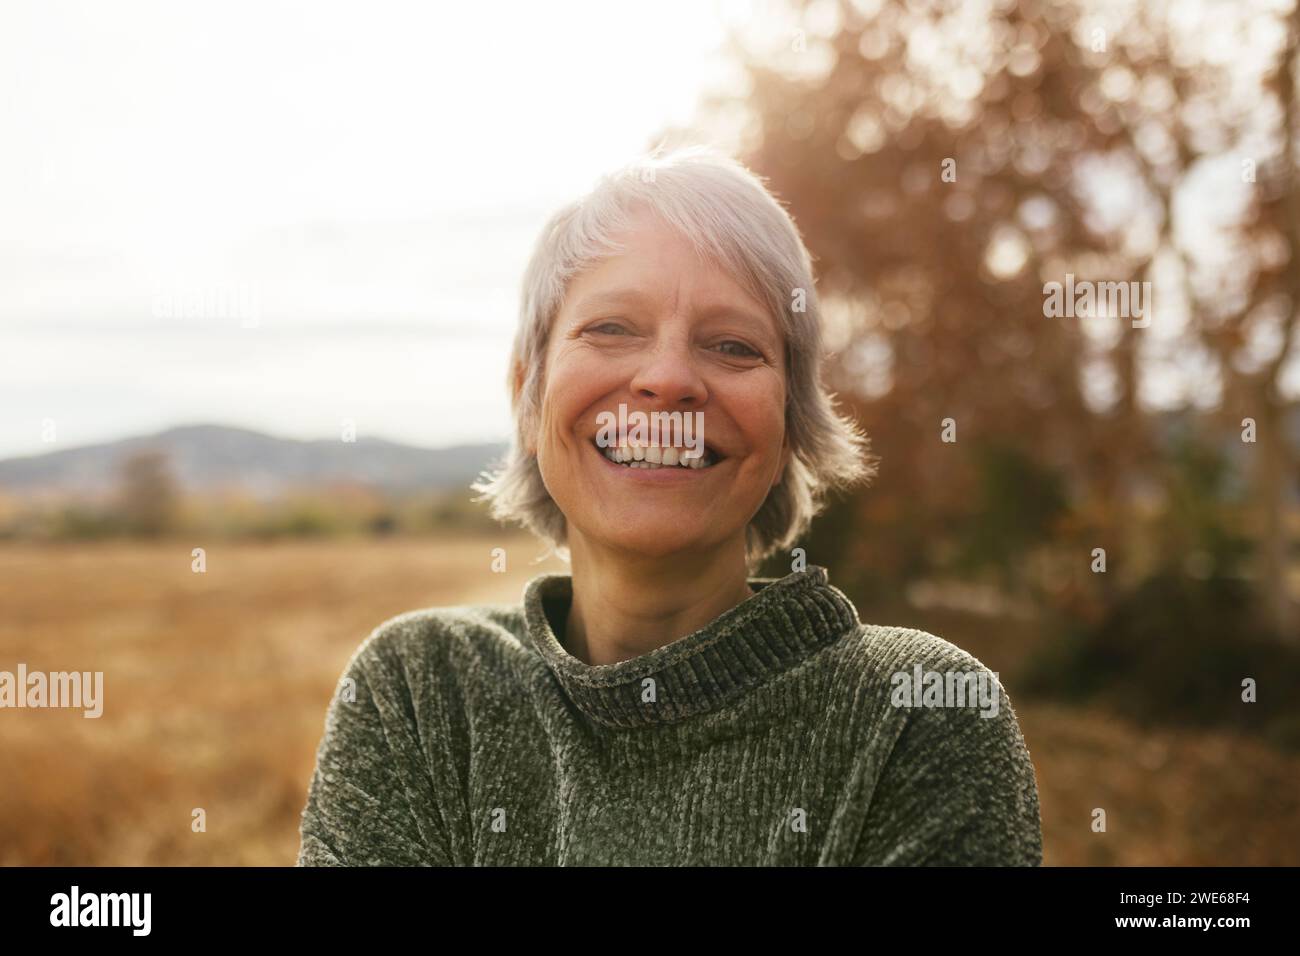 Happy woman with gray hair at field Stock Photo